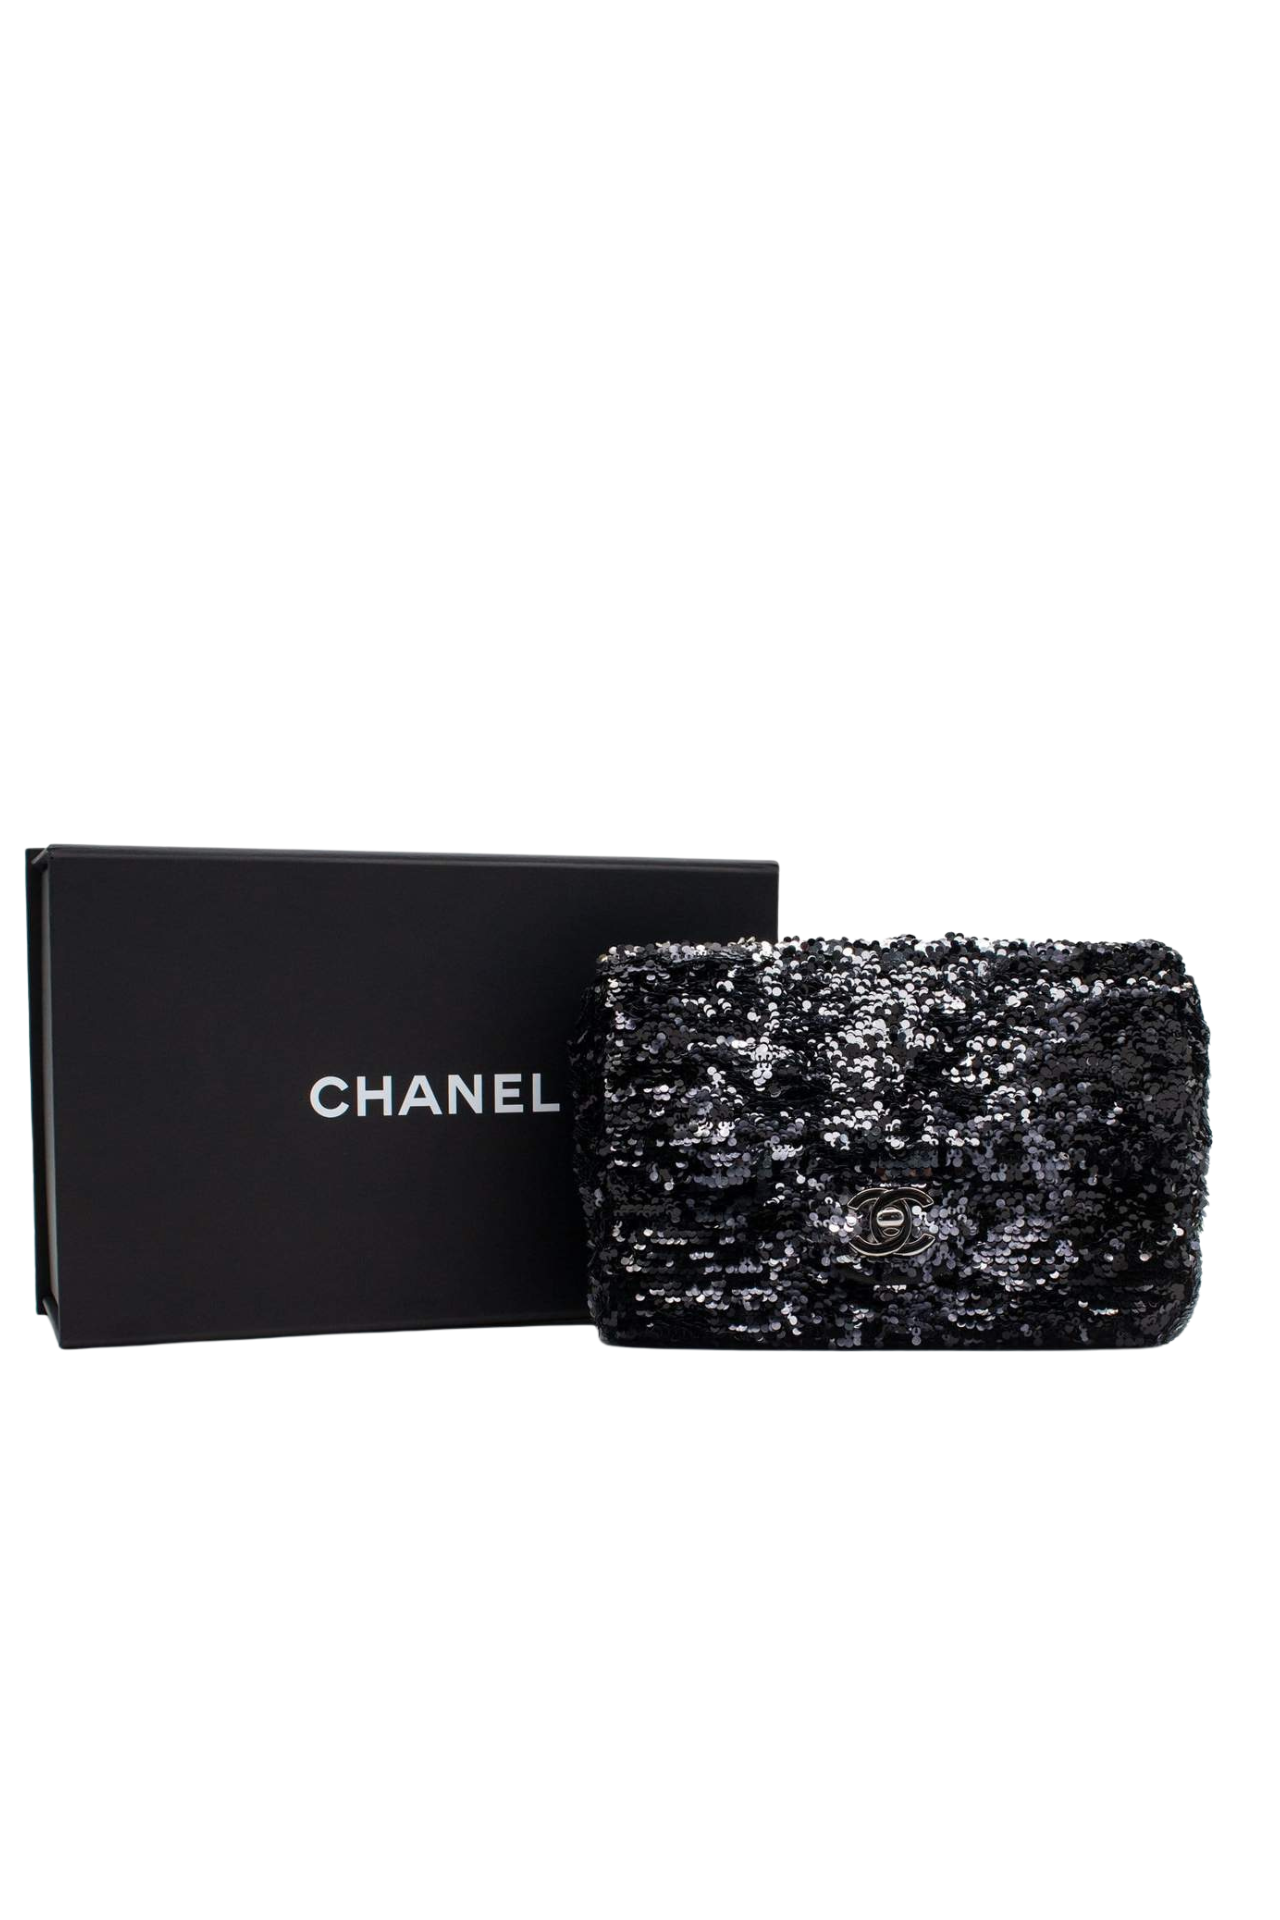 Chanel Sequin Classic Small Flap